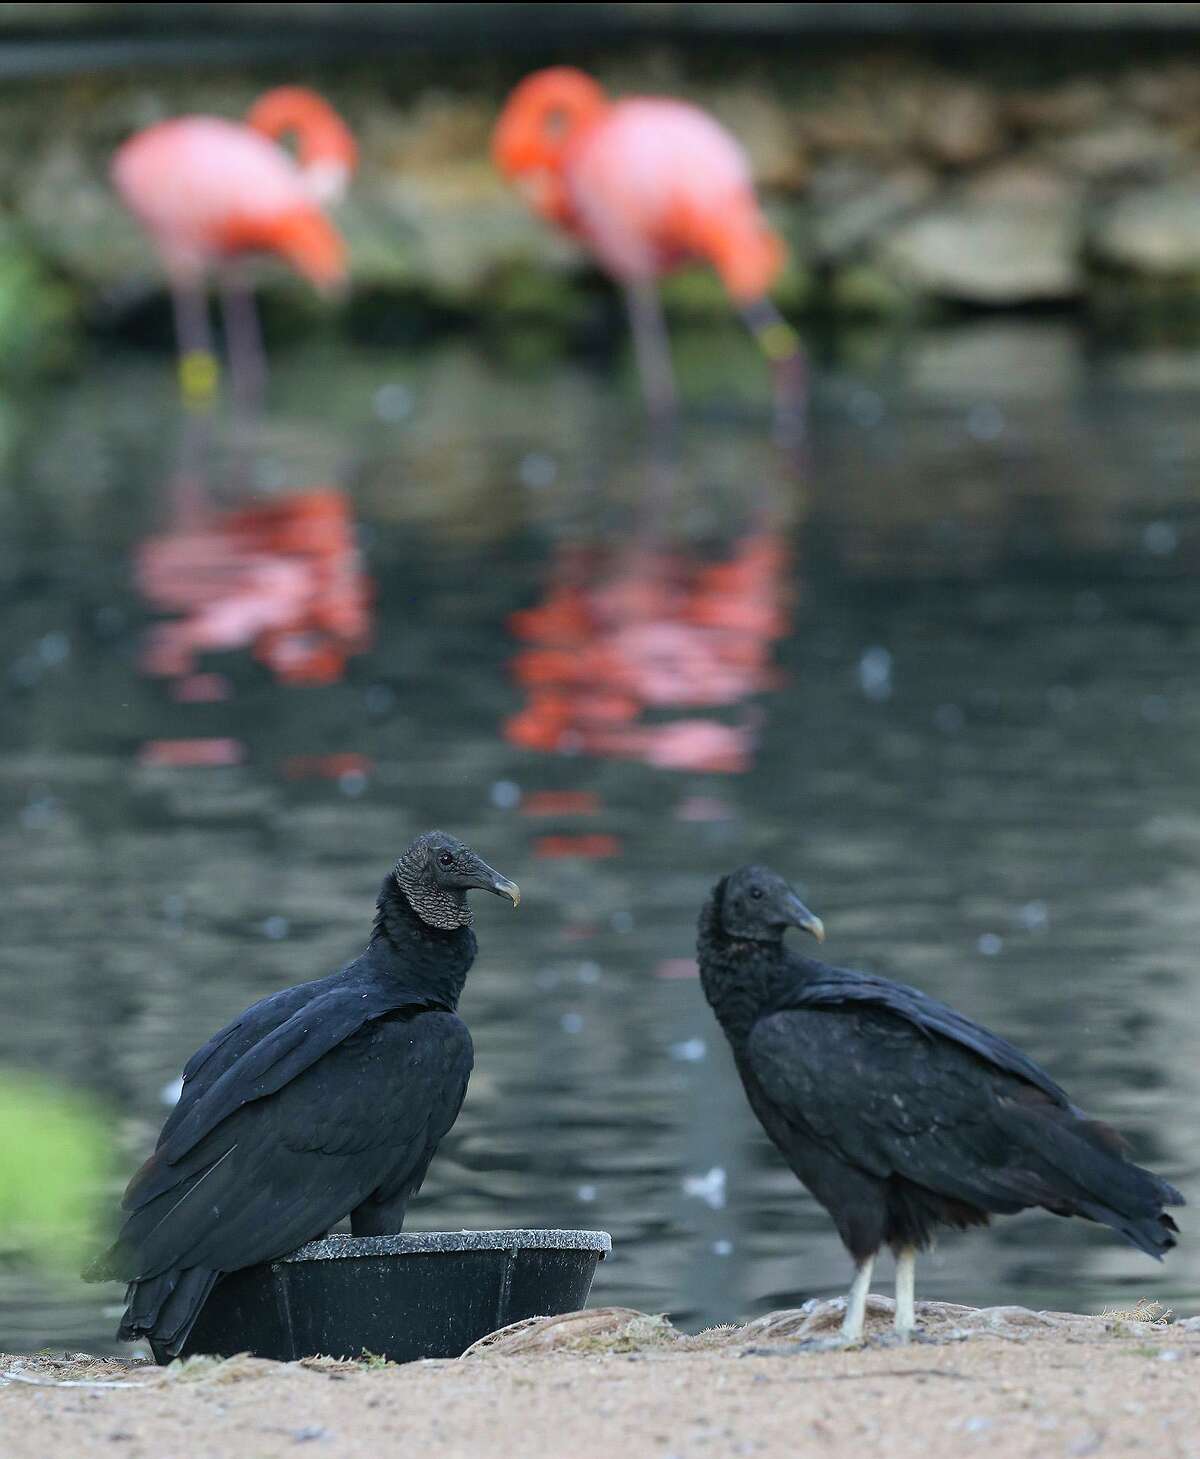 Black vultures at the San Antonio Zoo sit by water. In the background are two pink flamingos.